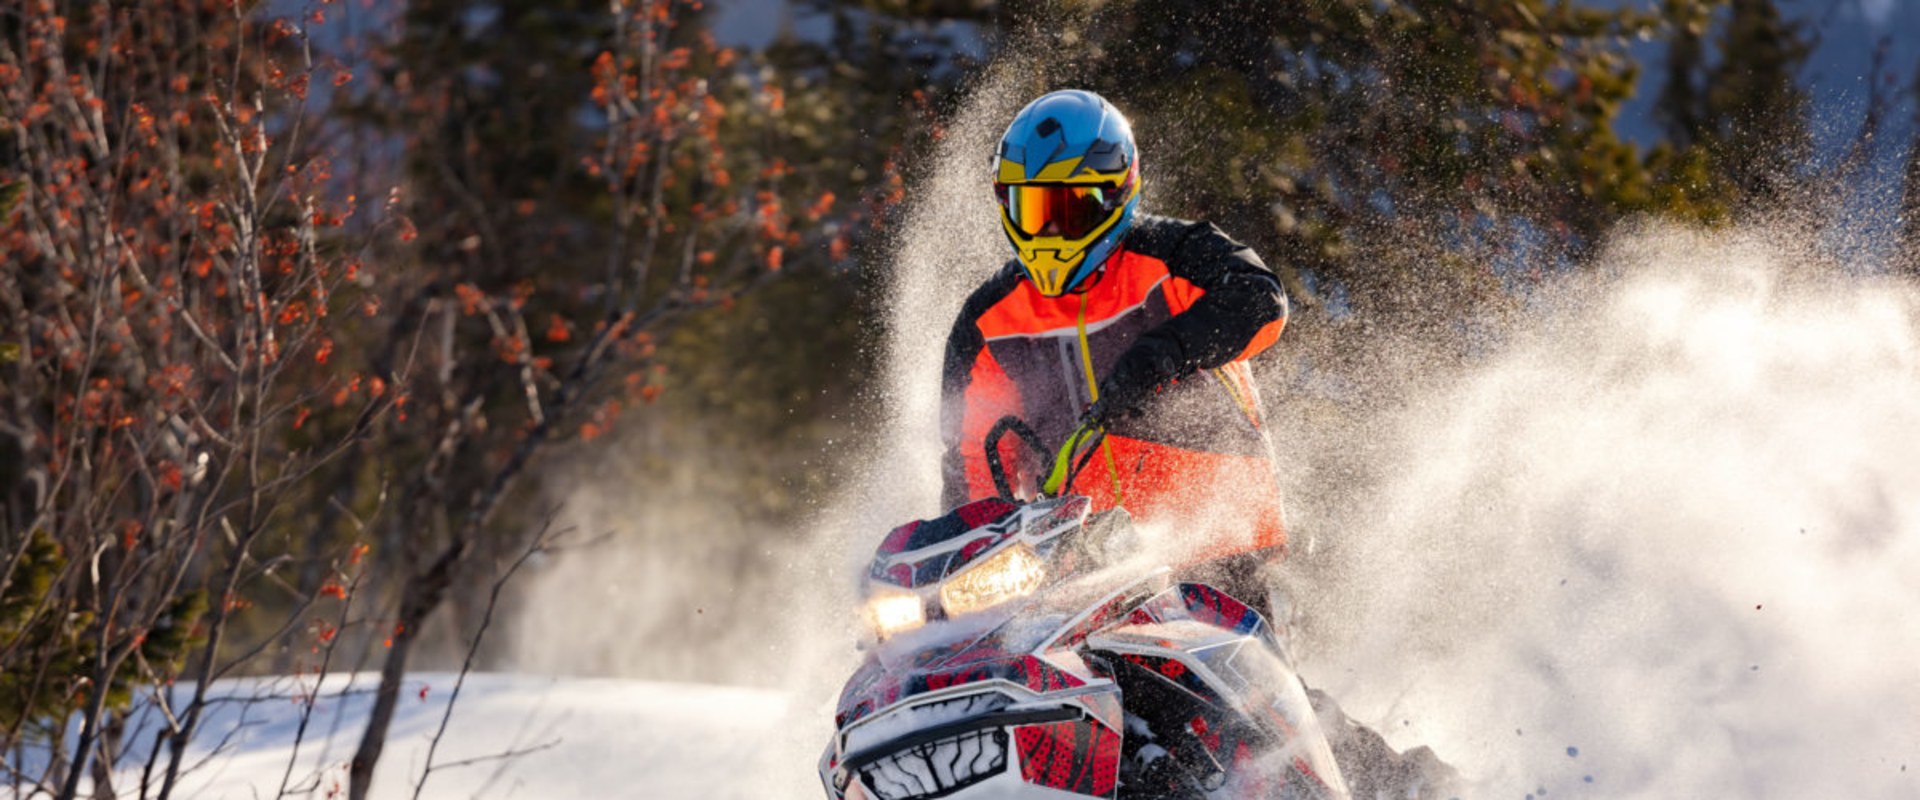 What's the fastest snowmobile can go?